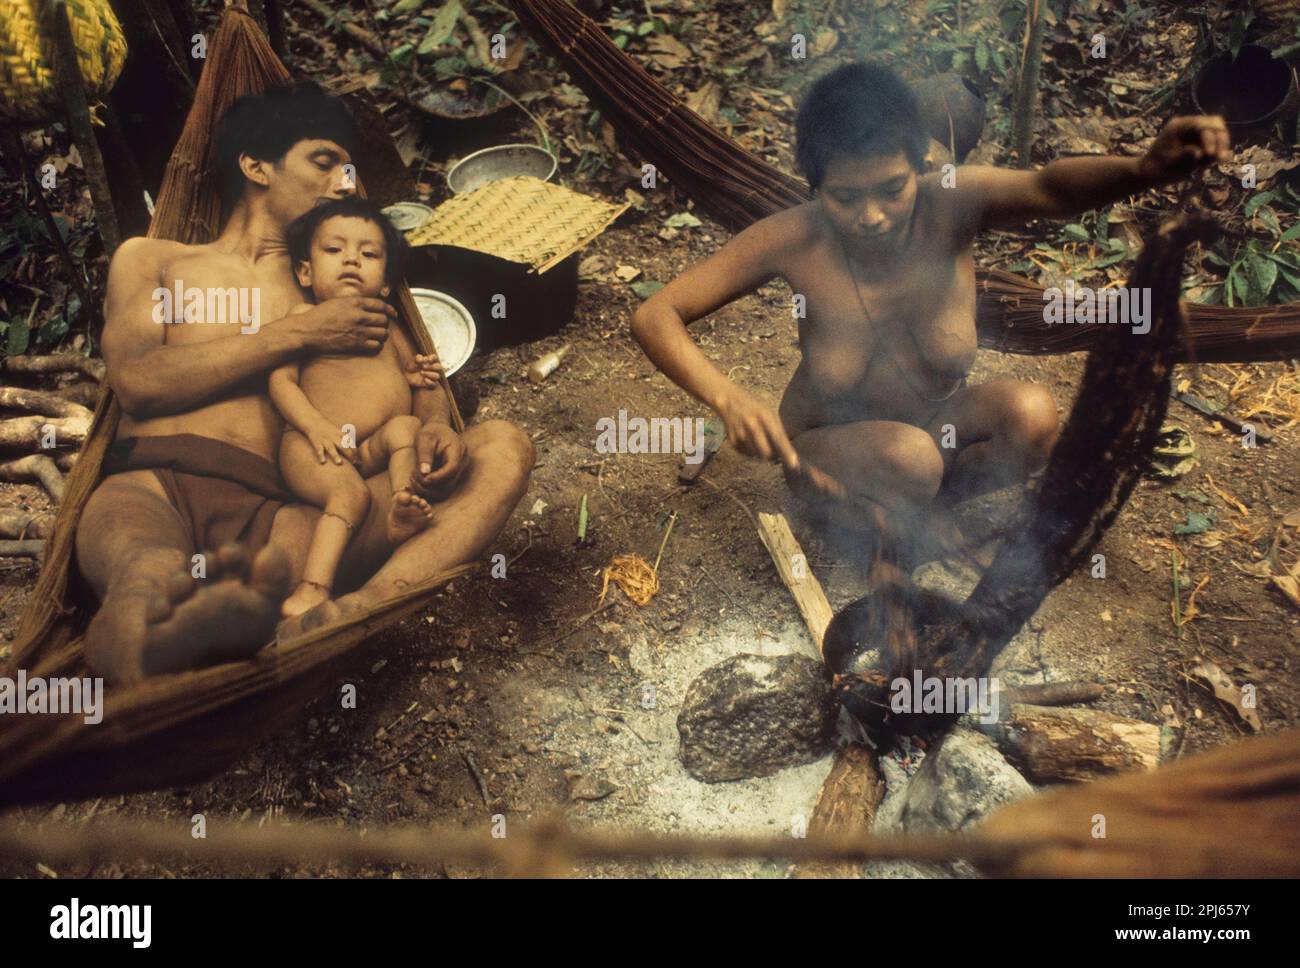 Indigenous people of Venezuela: Eñepa (Panare) tribe: family at camp in rainforest: man in hammock with child, woman making a wax torch. Stock Photo